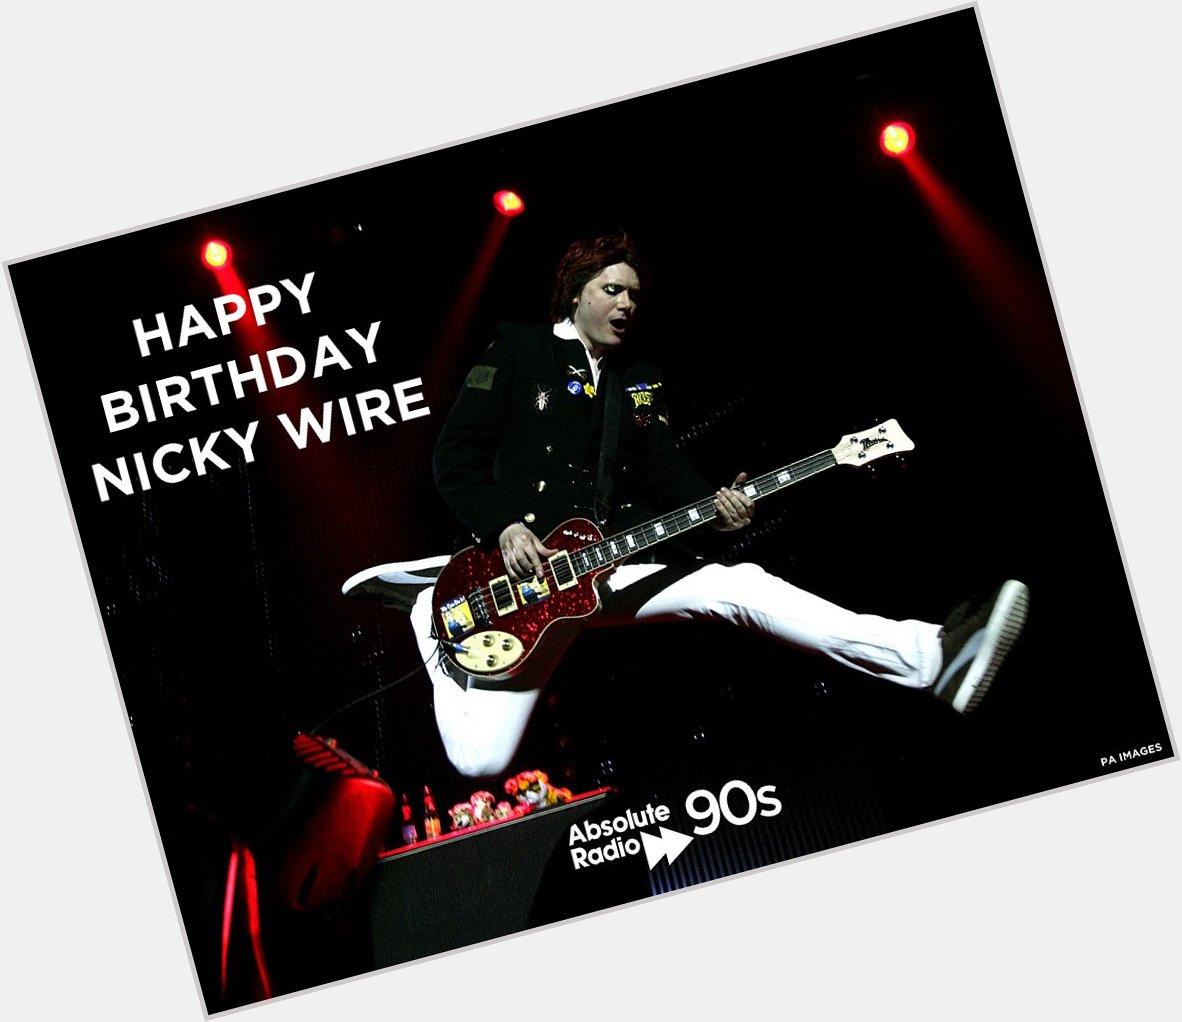 Happy Birthday Nicky Wire! What is your favourite 90s Manics song? 